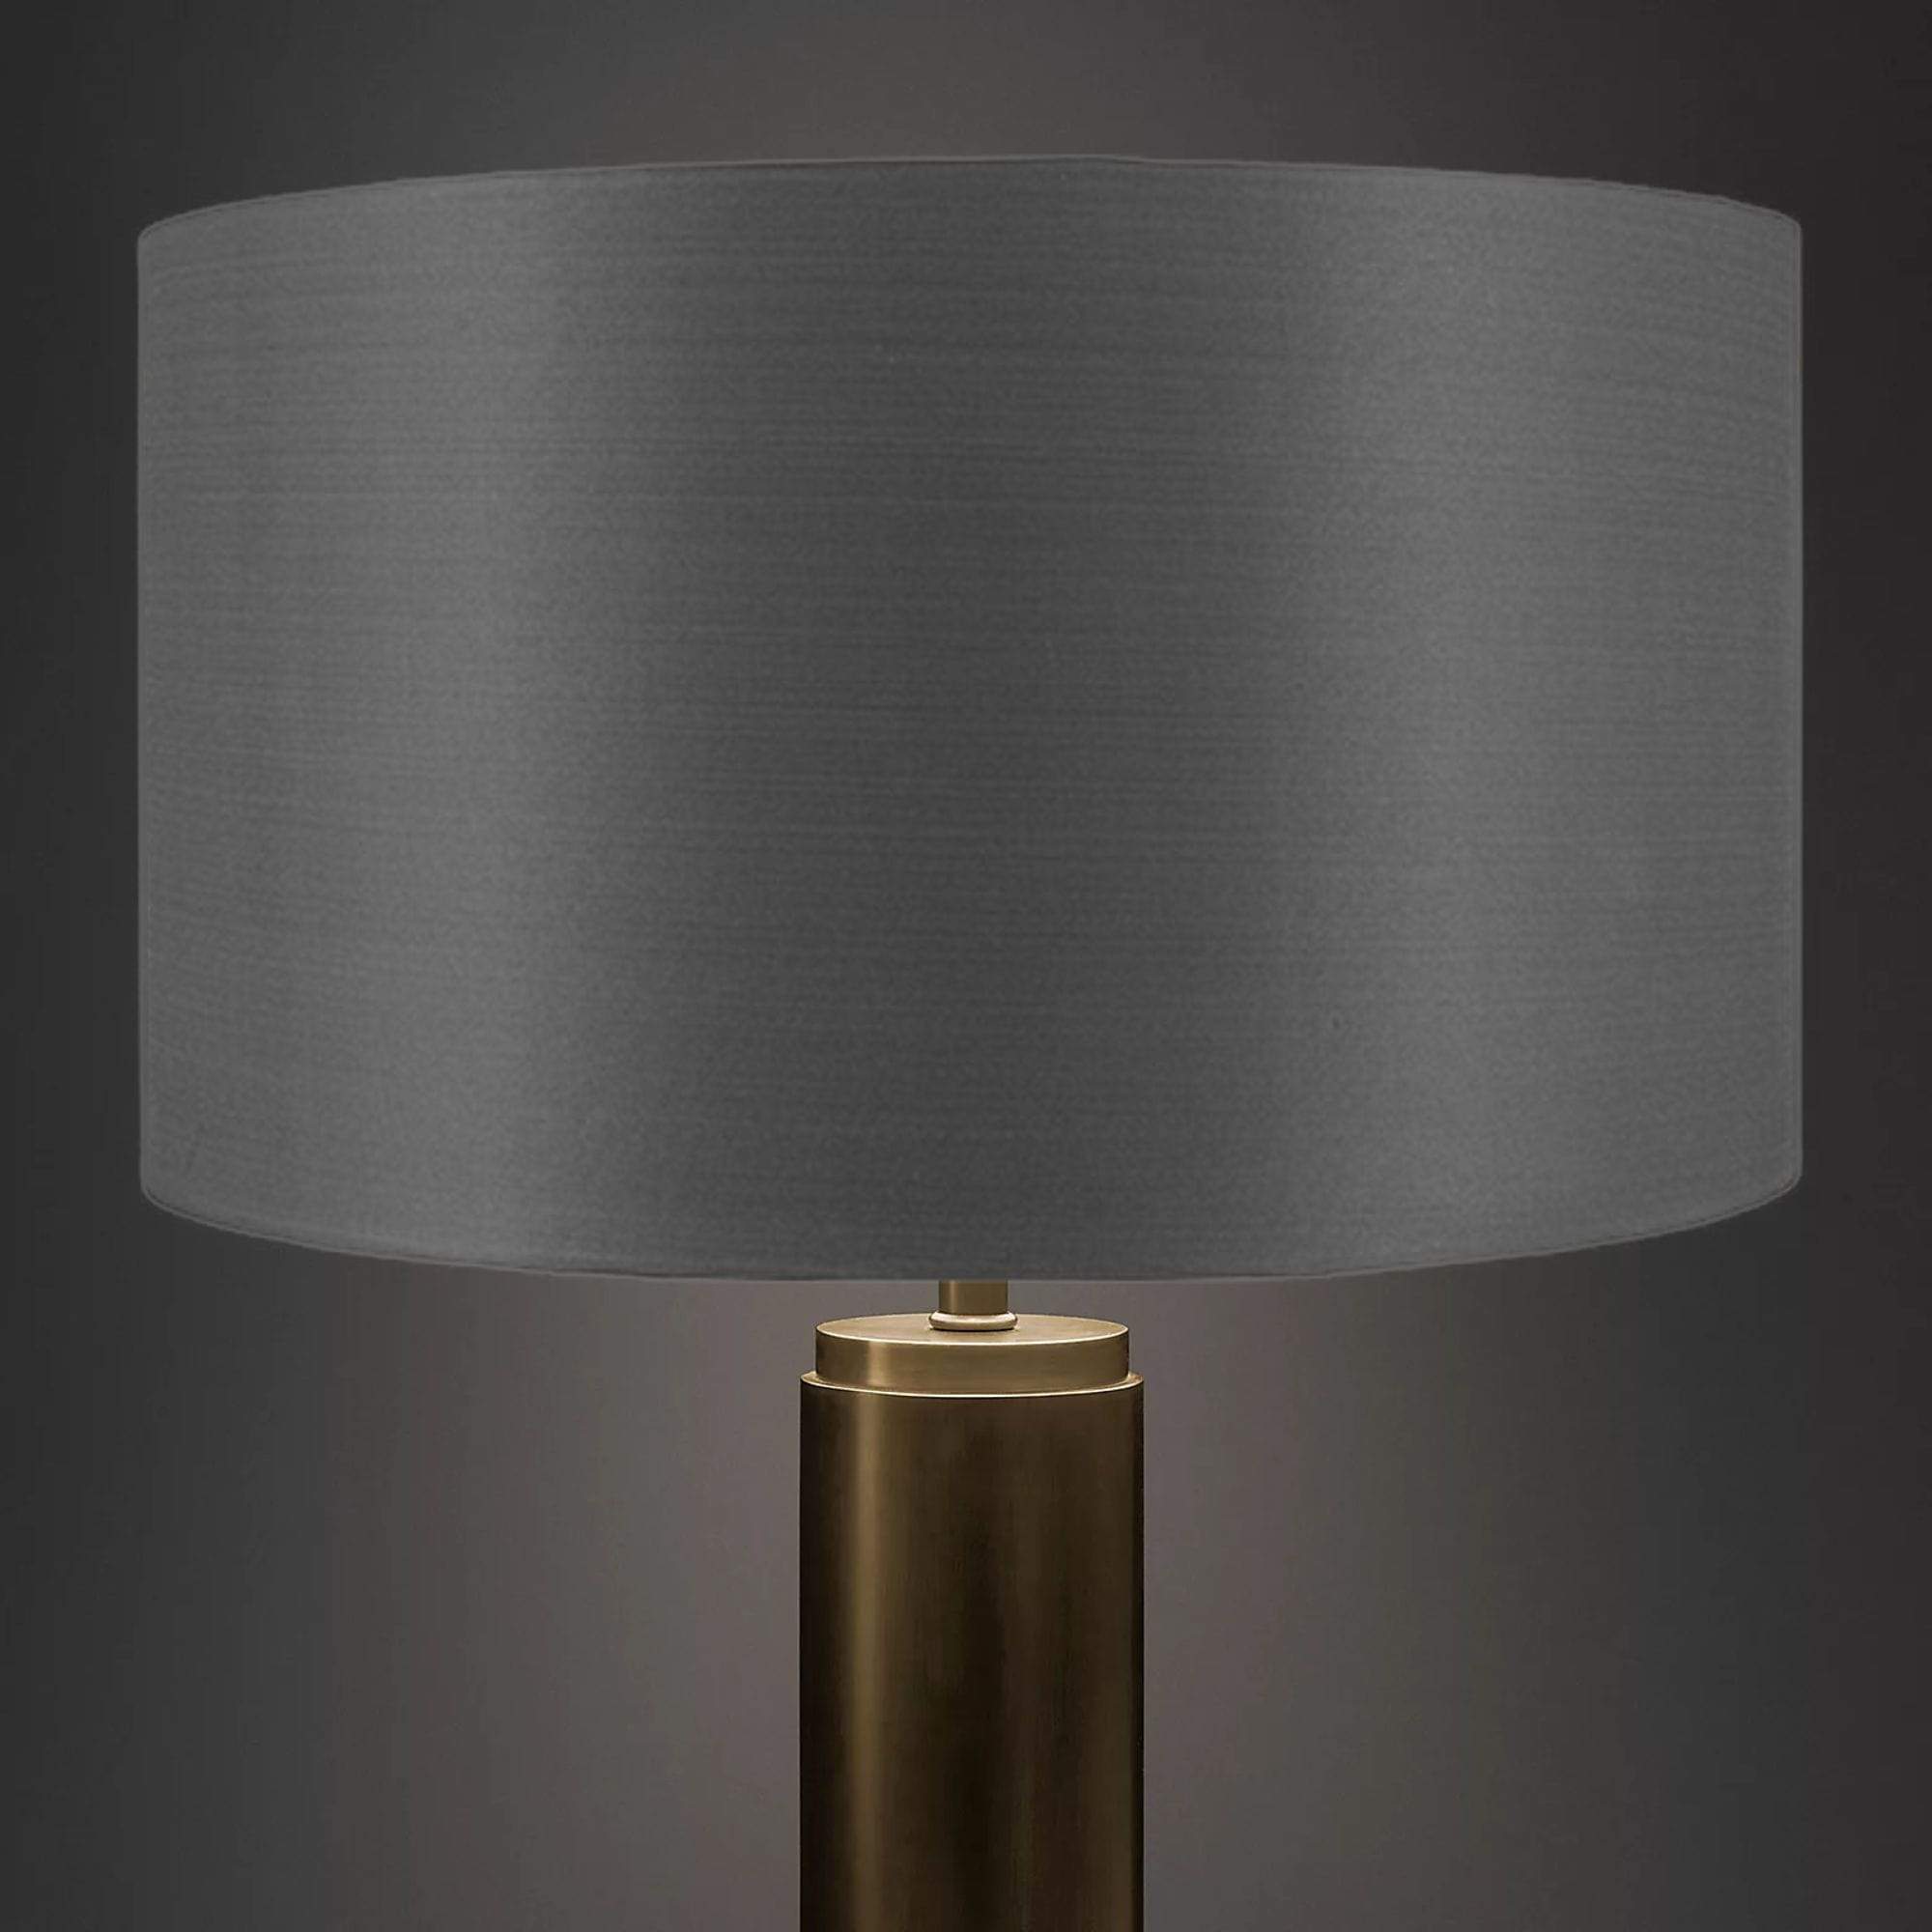 Escapology Silk Drum Lampshade - Steel Grey - escapologyhome.co.uk